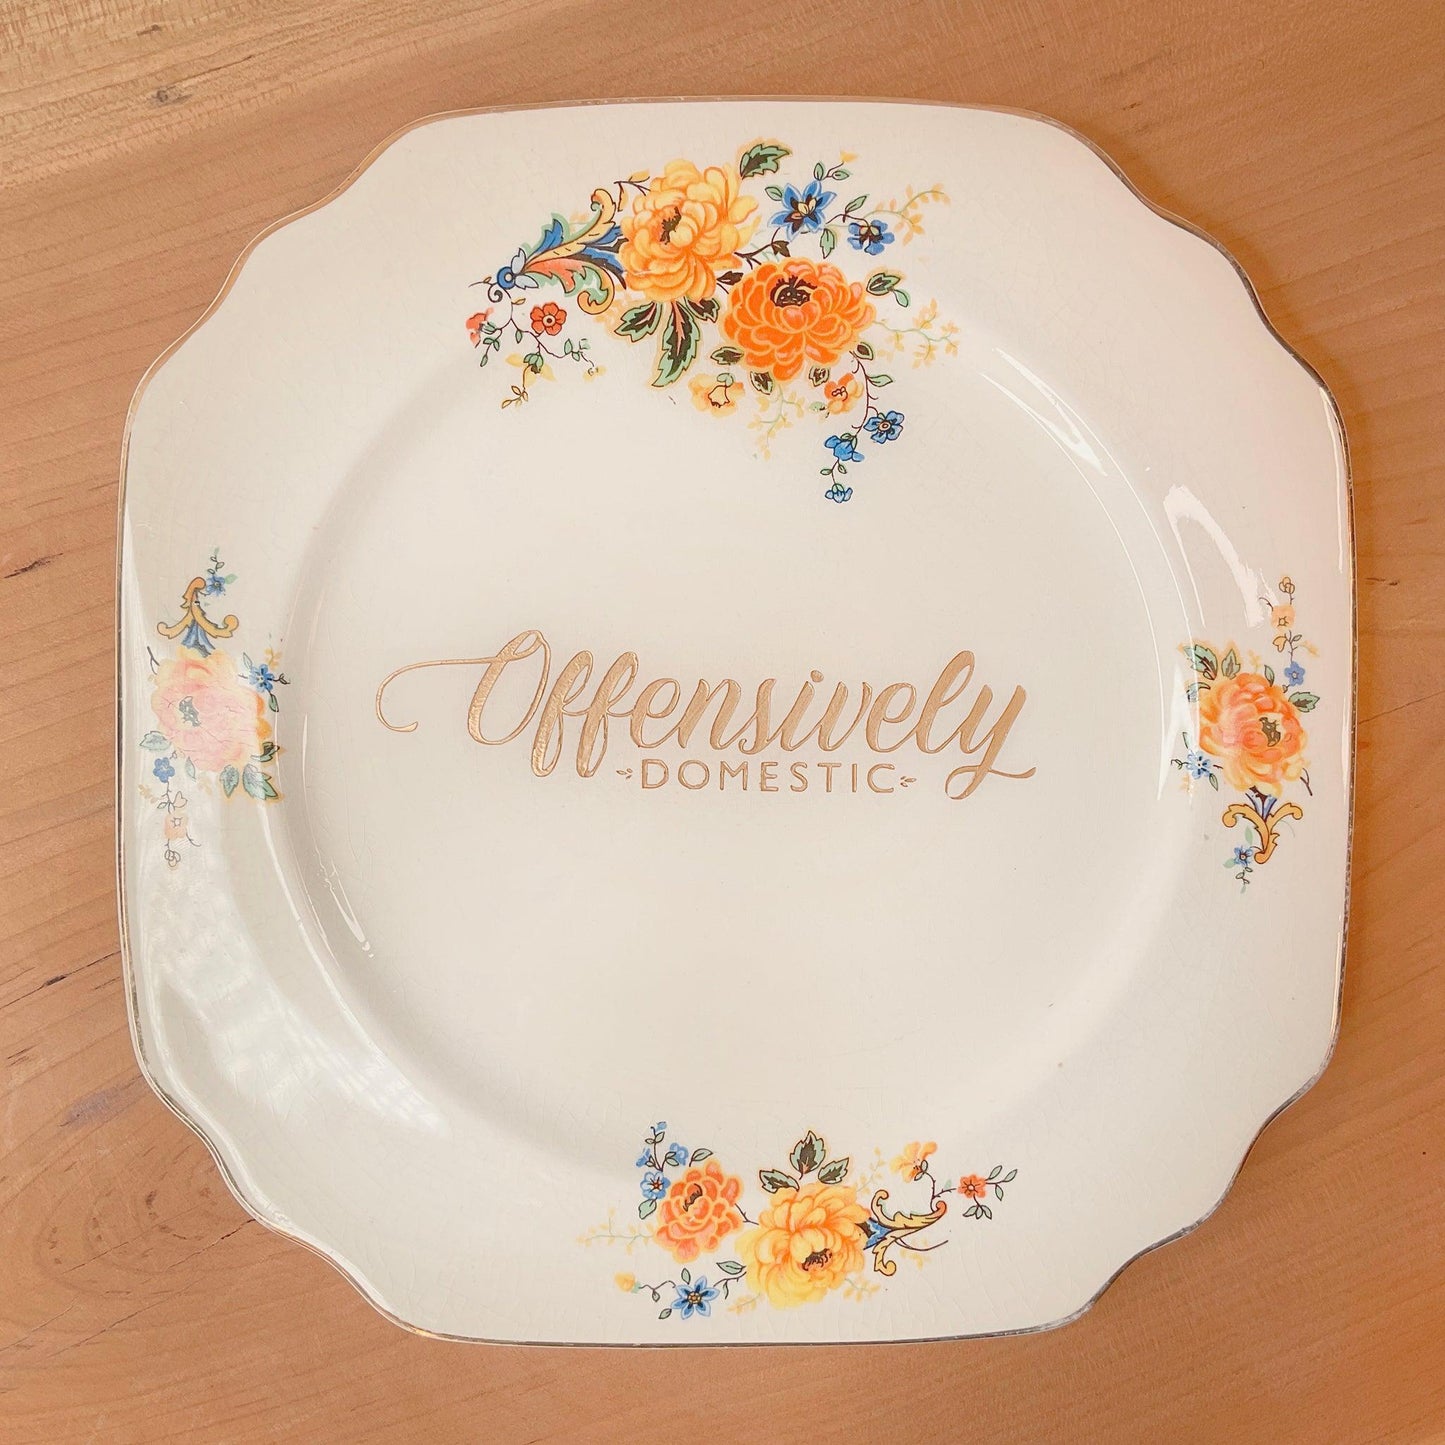 OD Dinner Plate - Offensively Domestic